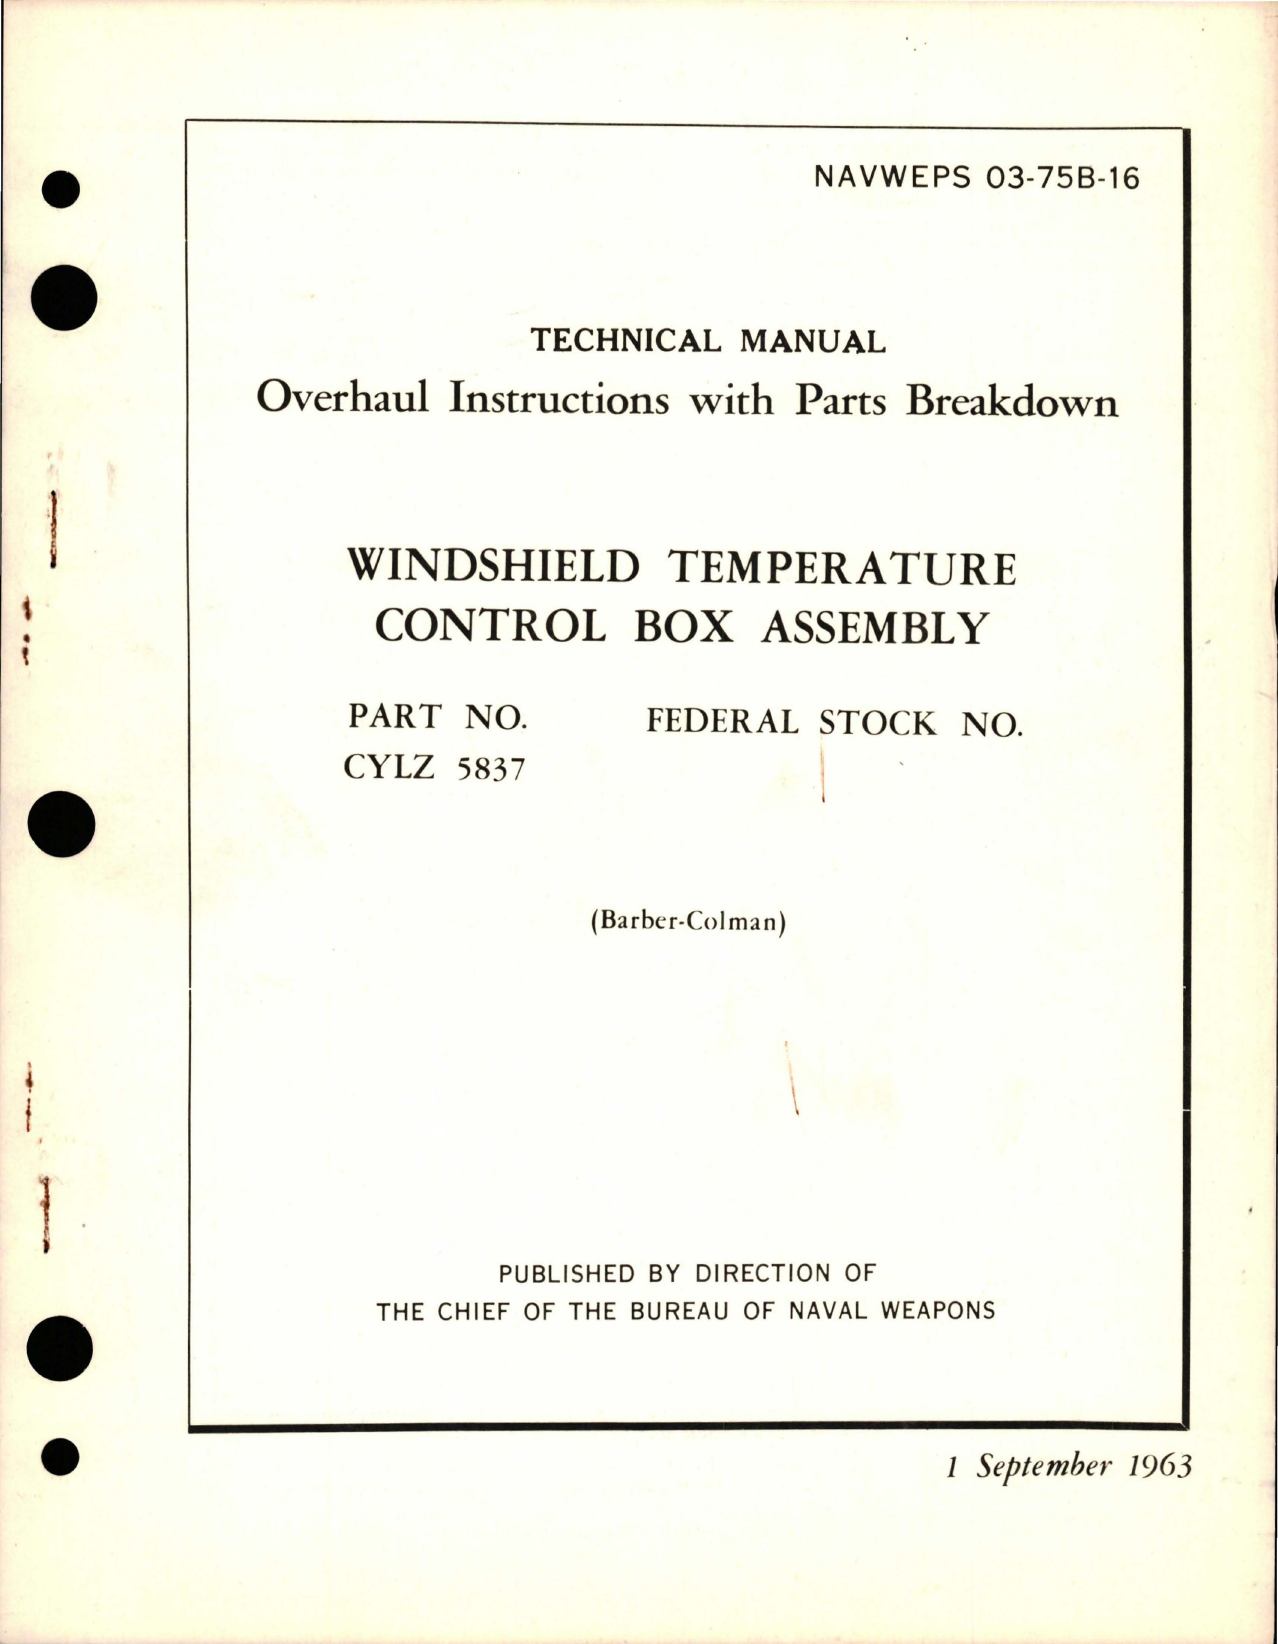 Sample page 1 from AirCorps Library document: Overhaul Instructions with Parts Breakdown for Windshield Temperature Control Box Assembly - Part CYLZ 5837 